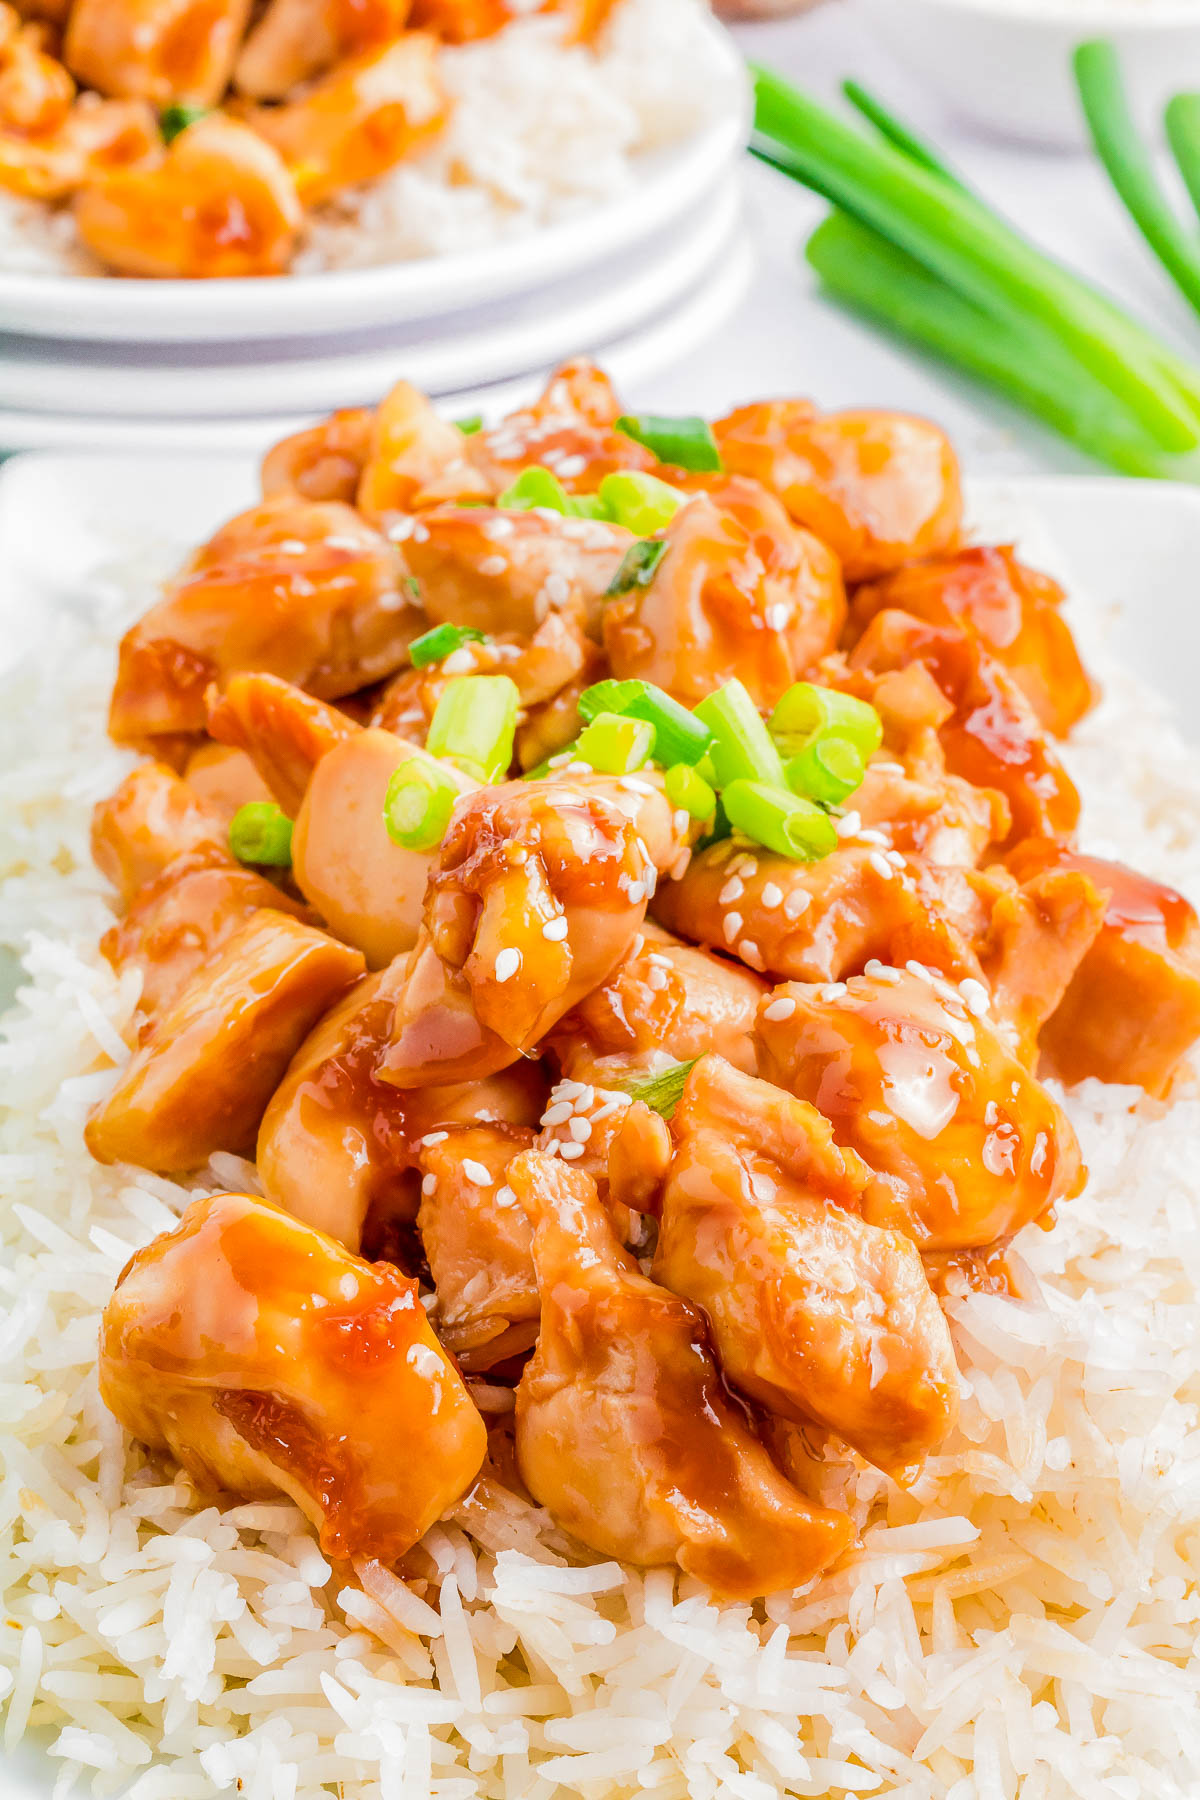 Close-up of a plate of teriyaki chicken with green onions served over white rice, with another plate and green onions in the background.